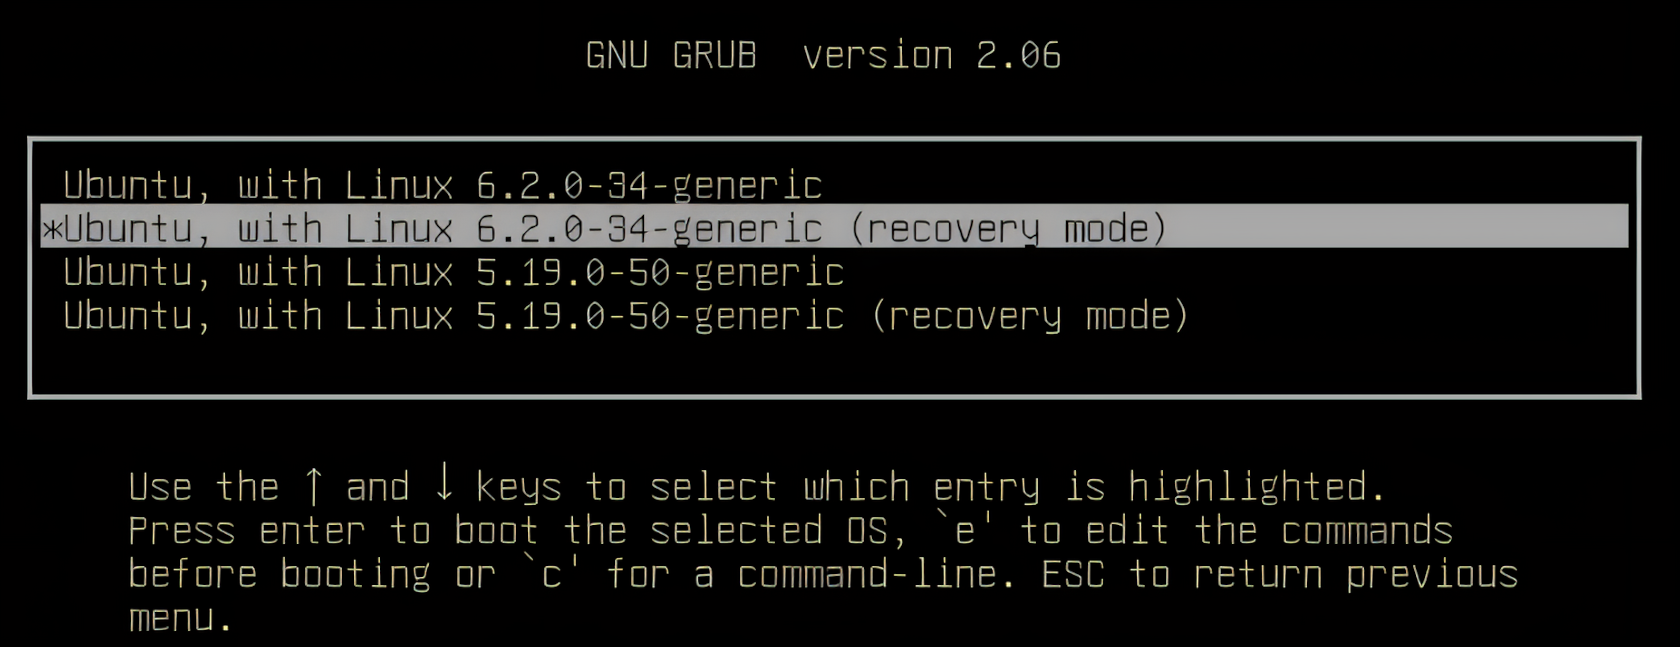 Gnu Grub advance menu with a recovery mode entry highlighted